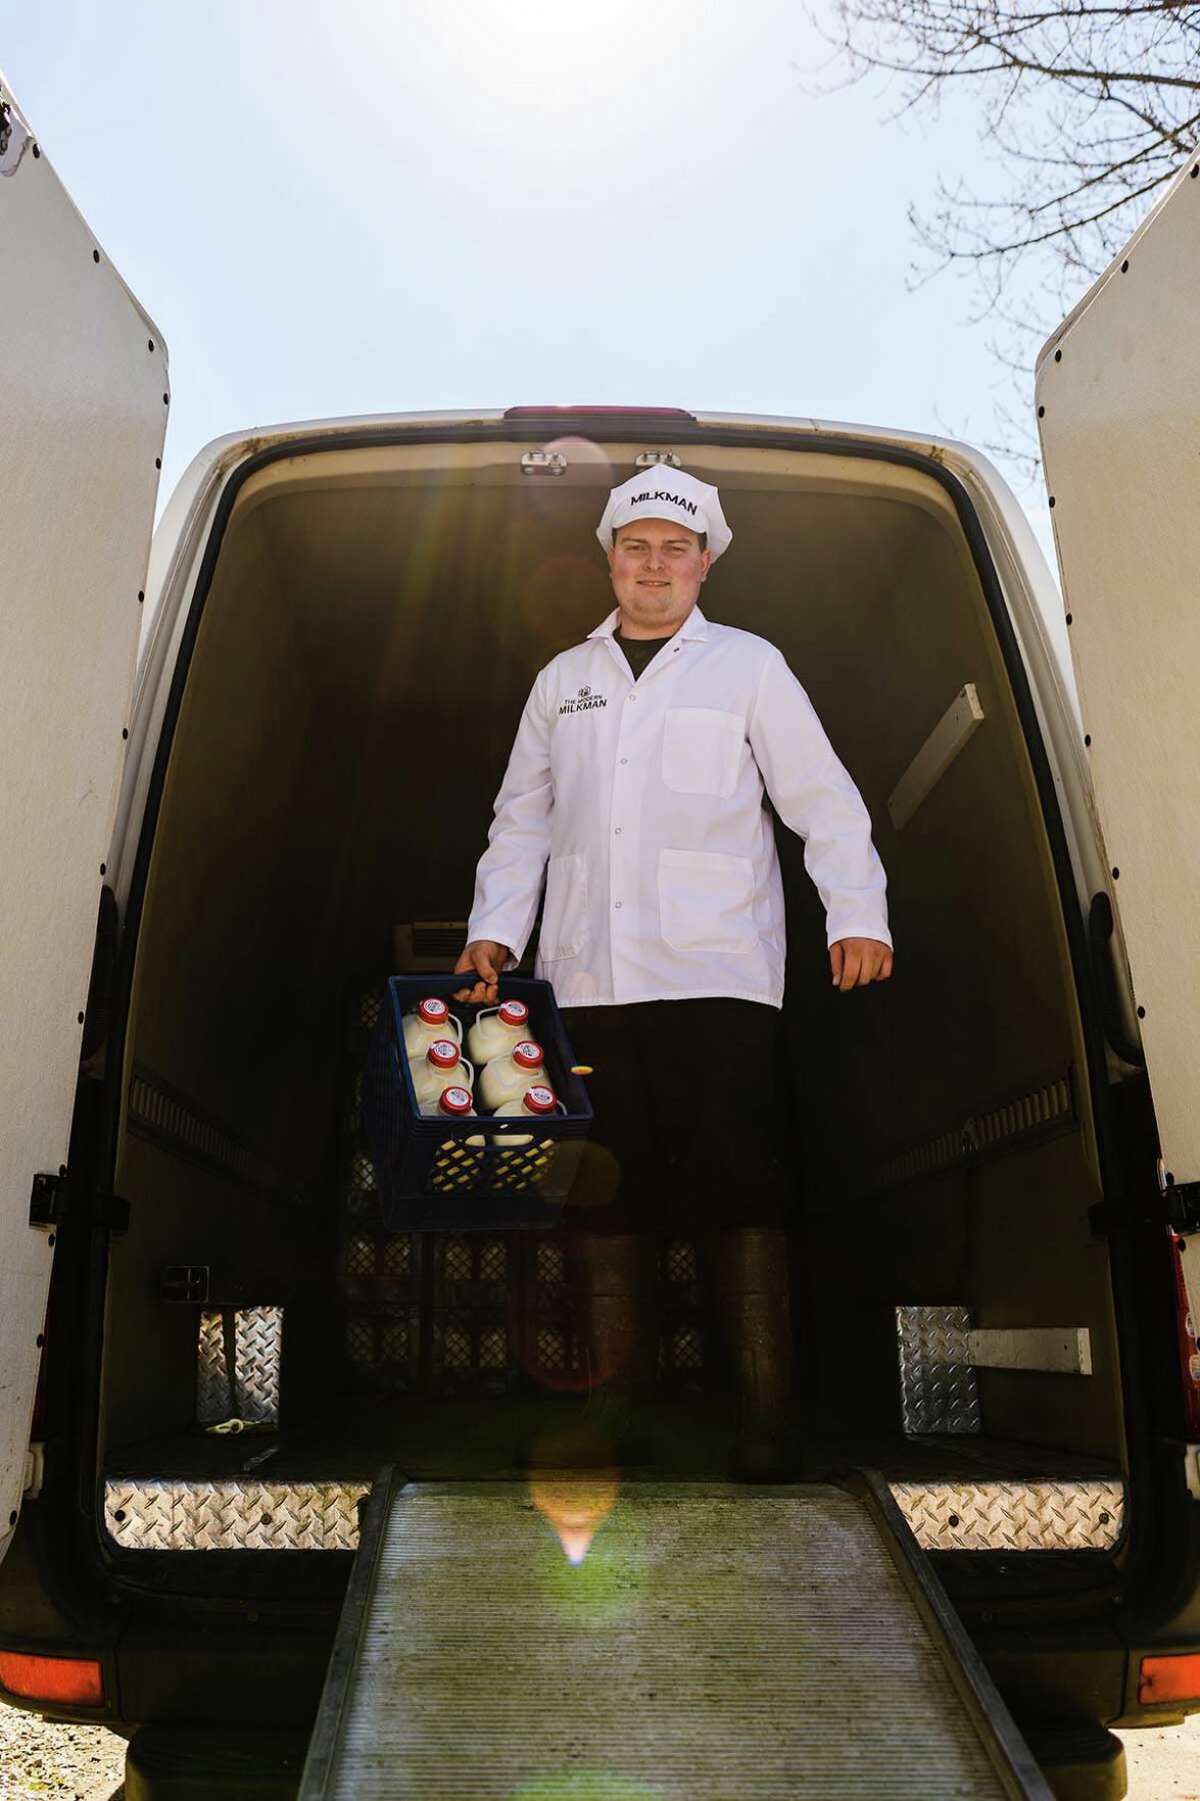 The Modern Milkman is bringing doorstep delivery back, with a 21st-century twist.